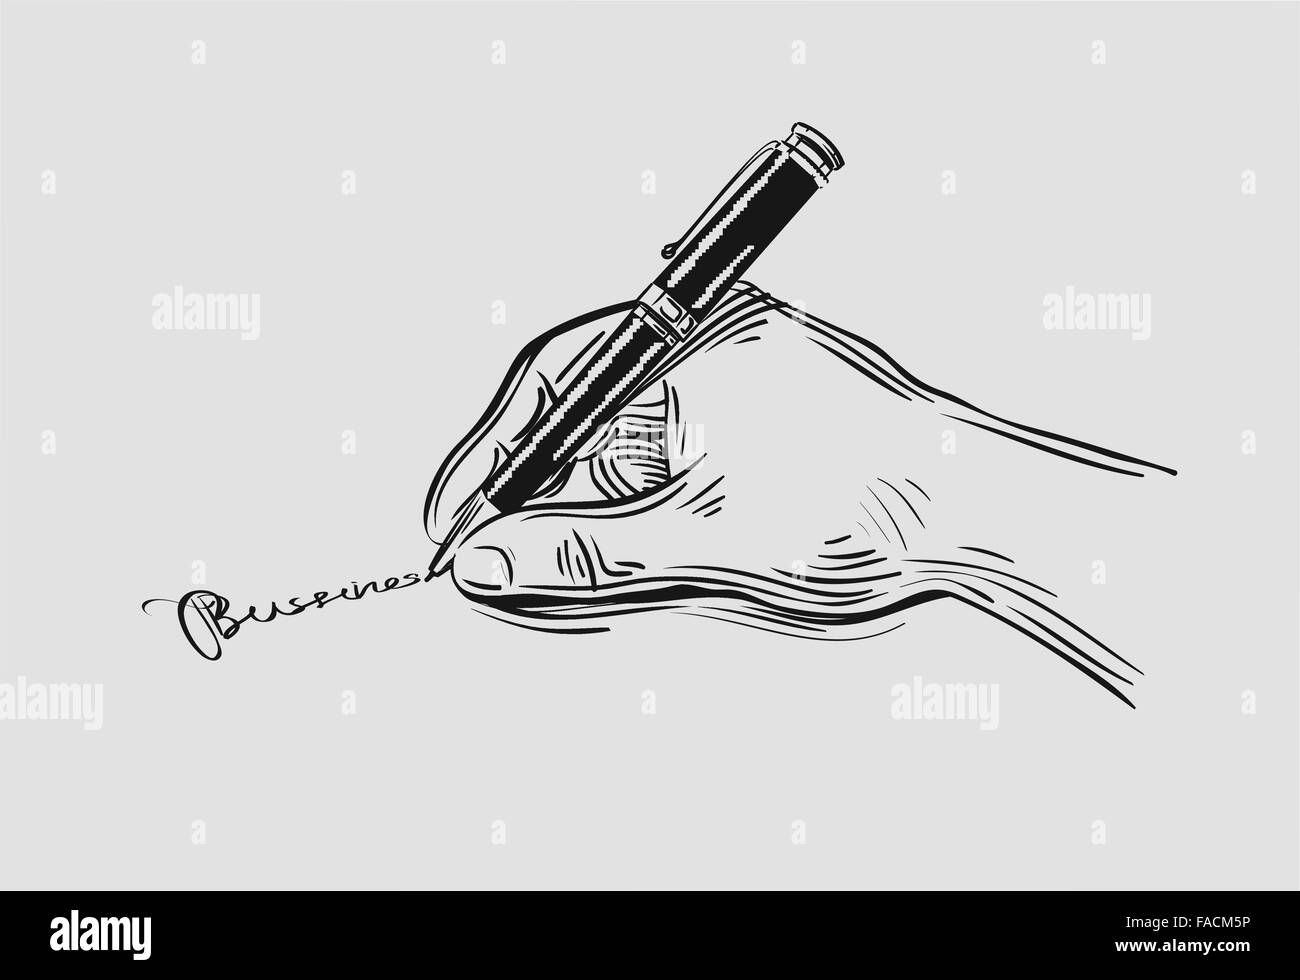 Business. Hand drawn sketch signing contract vector illustration Stock Vector